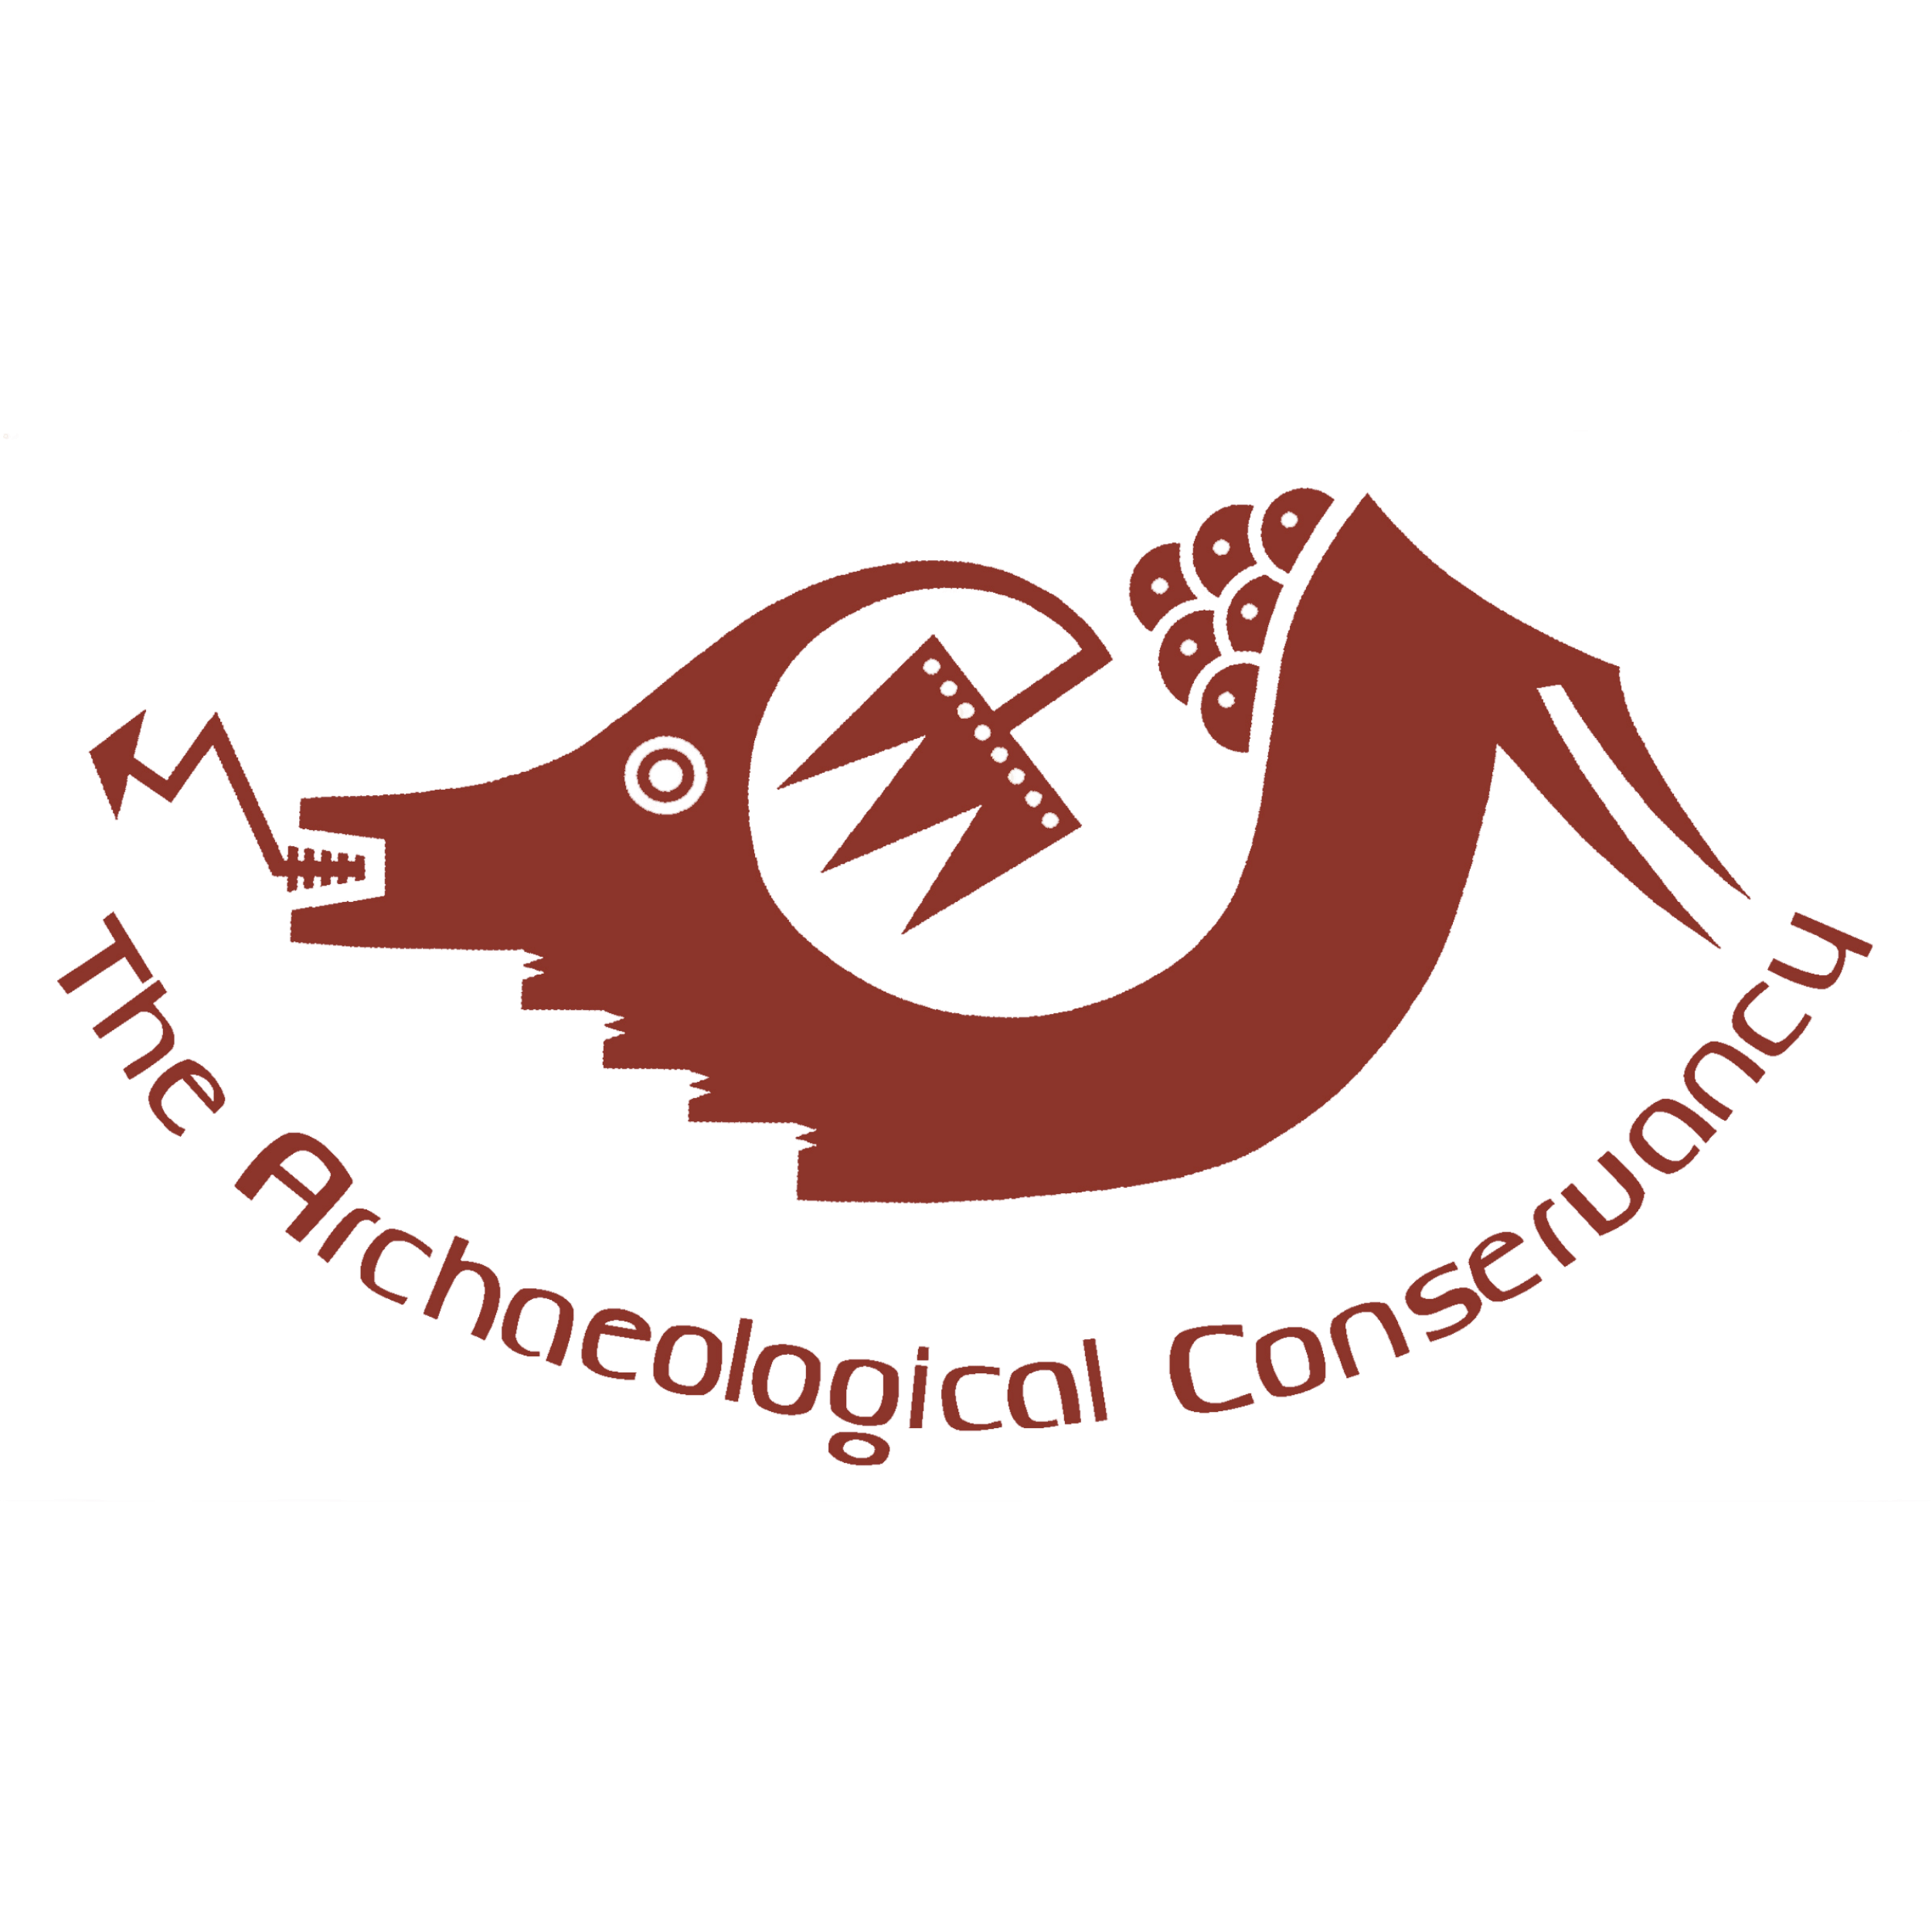 Archaeological Conservancy